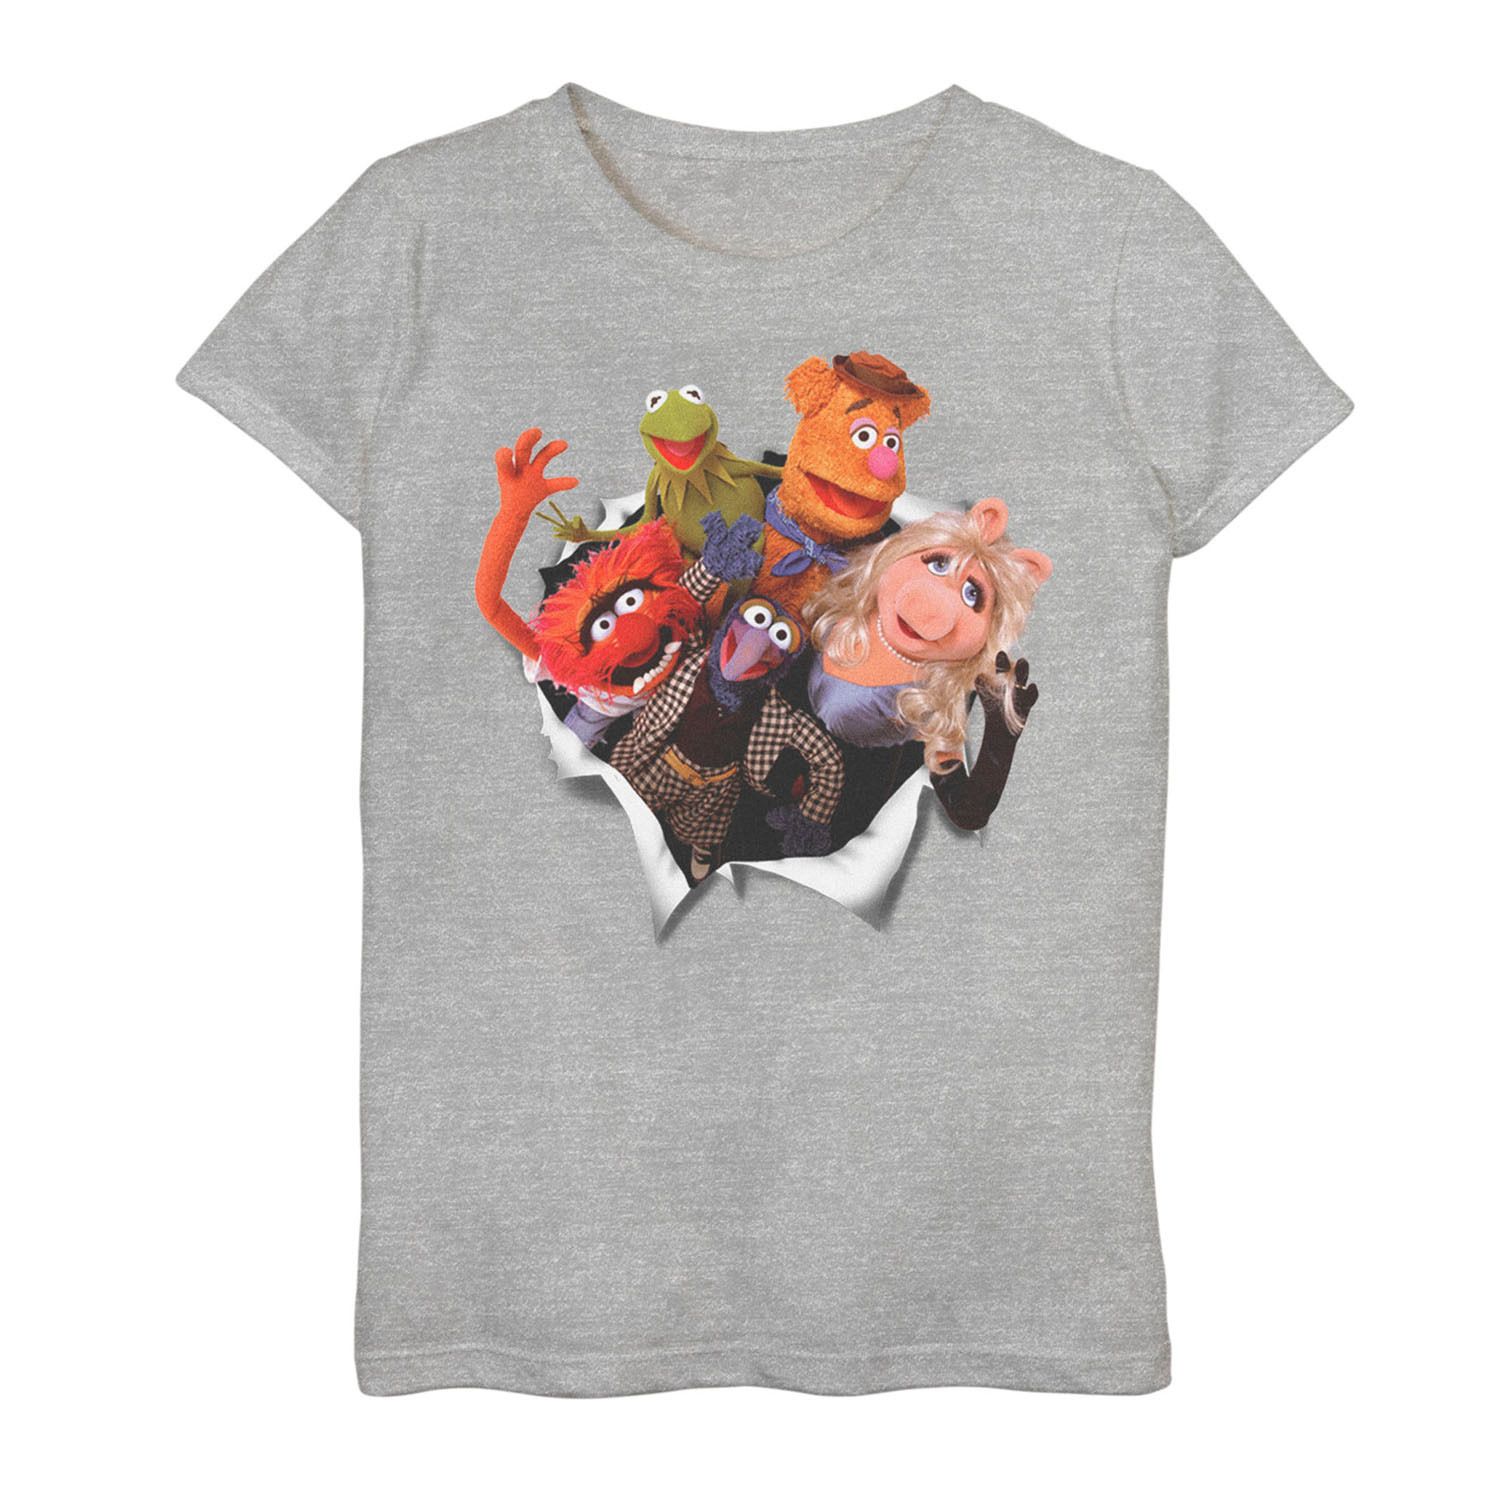 Image for Disney Girls 7-16 The Muppets Group Shot Breakthrough Graphic Tee at Kohl's.